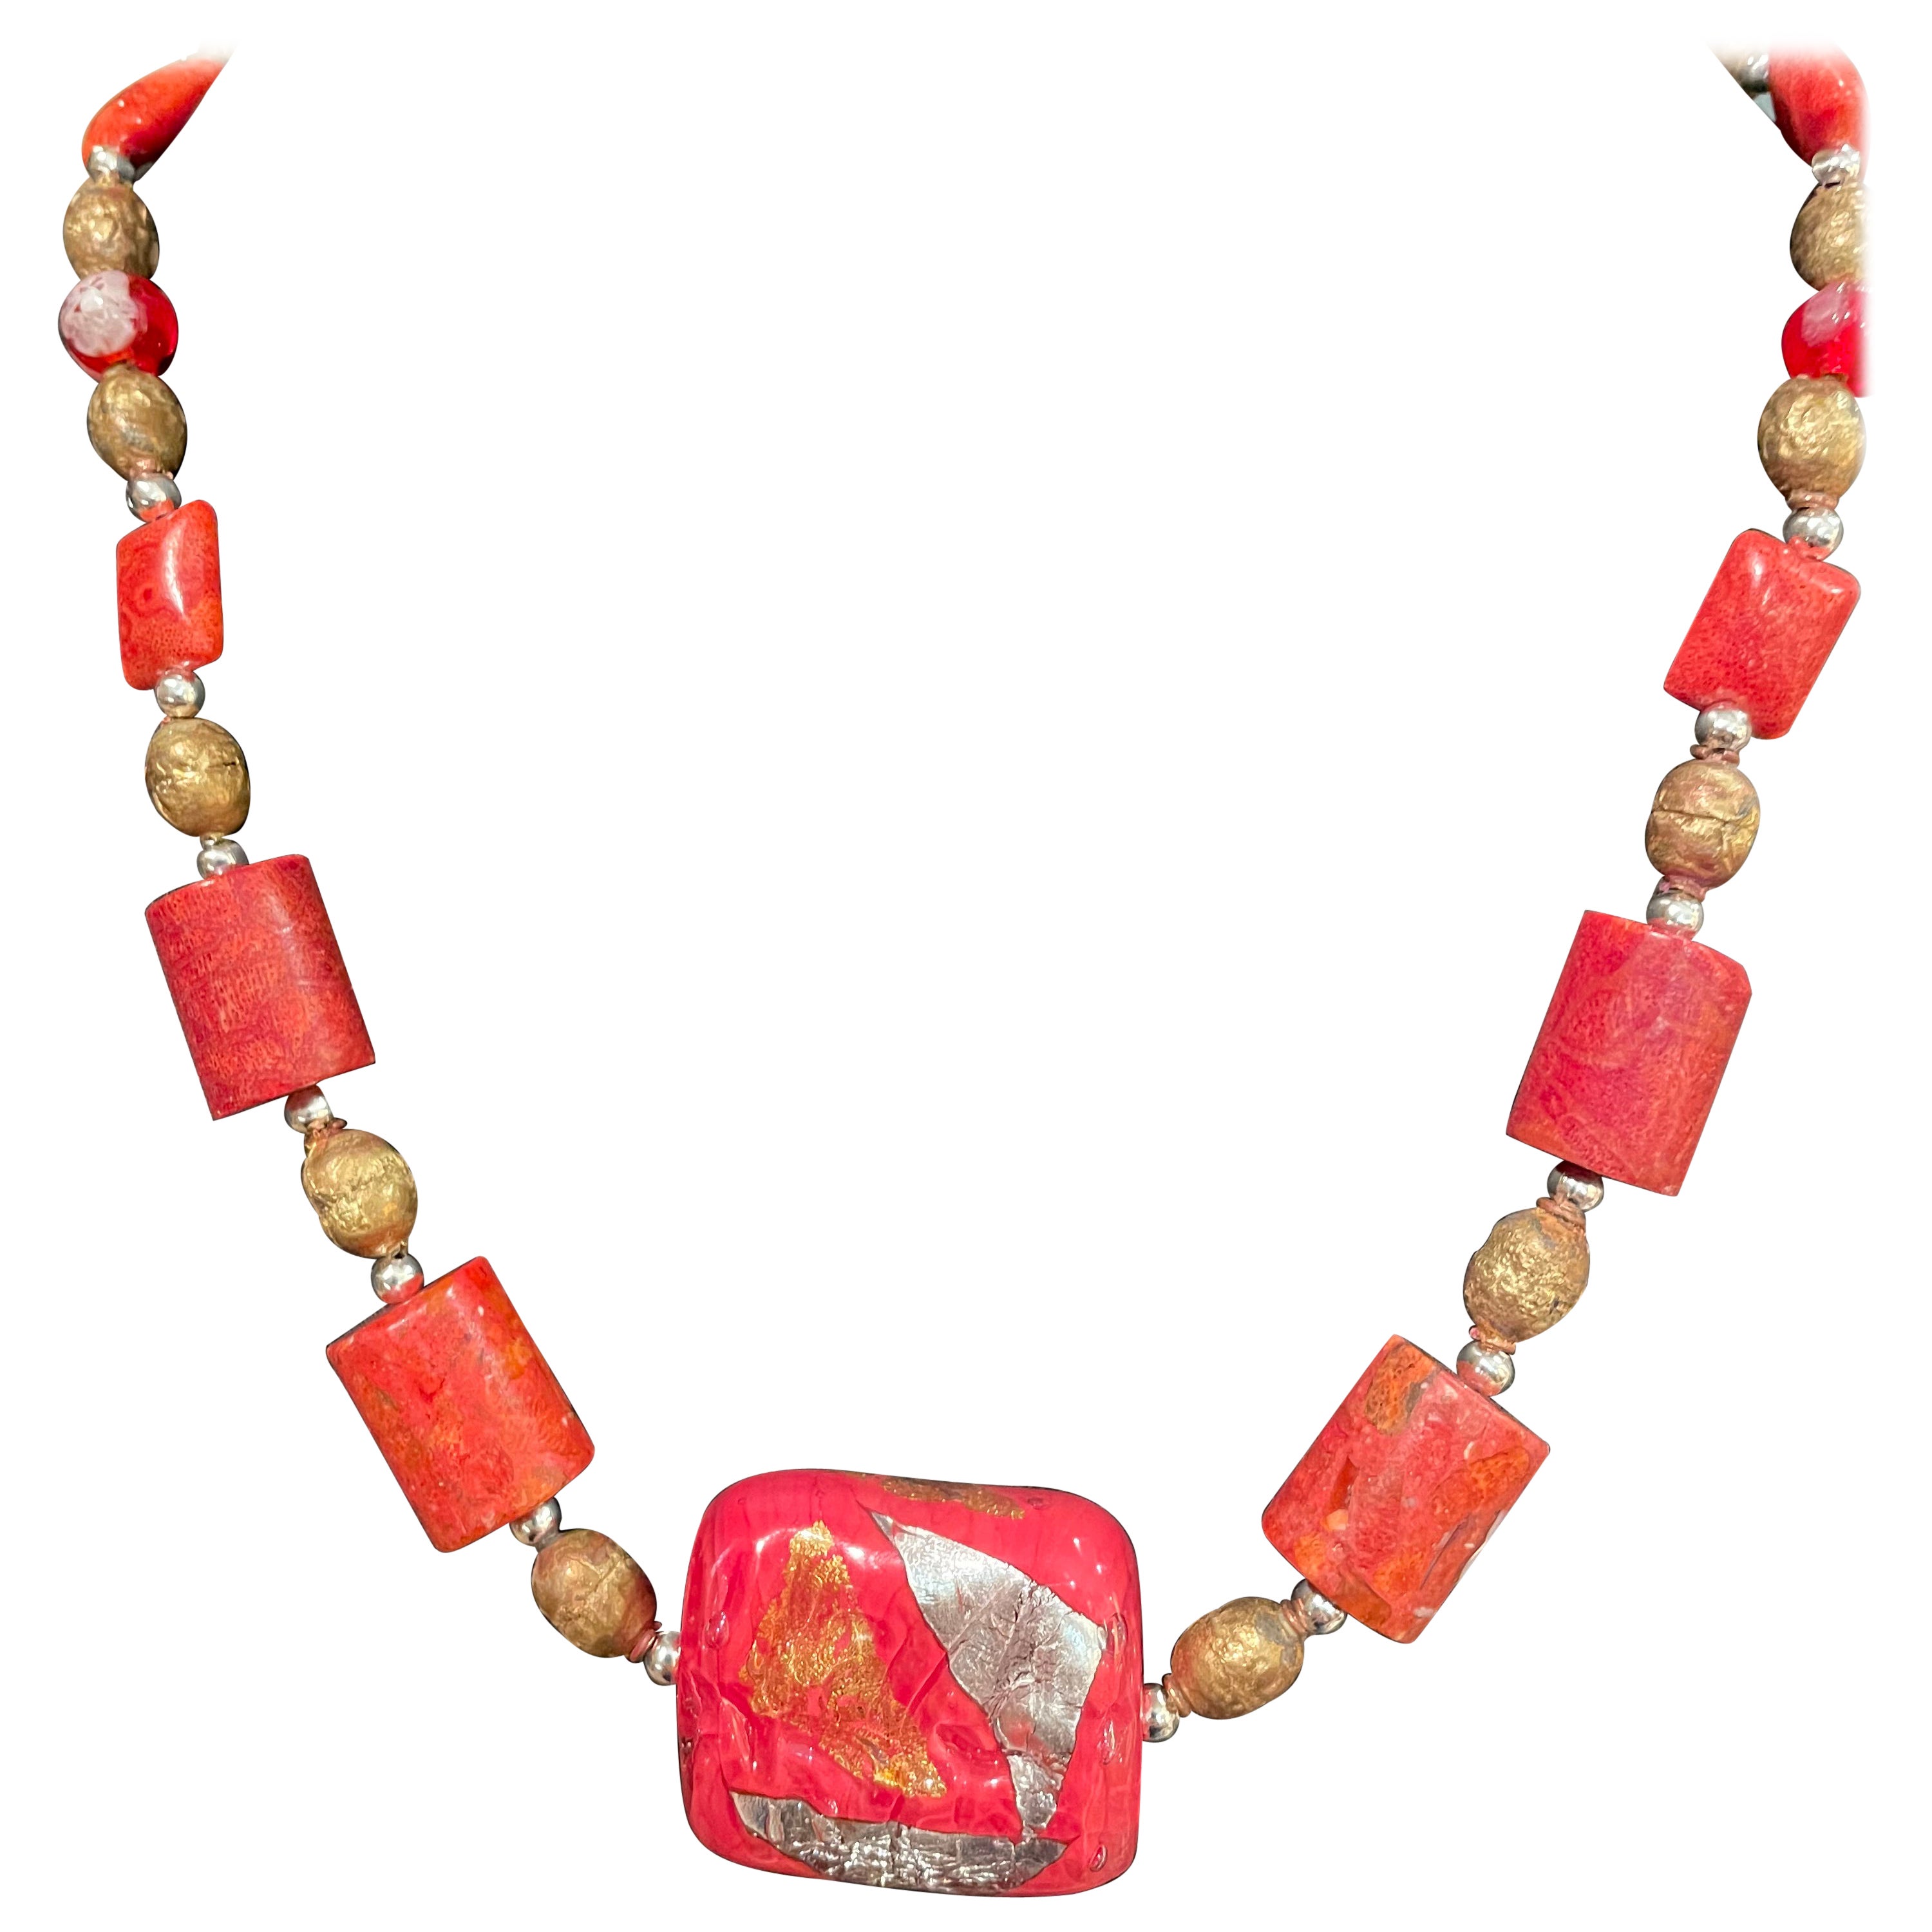 LB offers a handmade, one of a kind, Venetian bead and coral necklace with brass